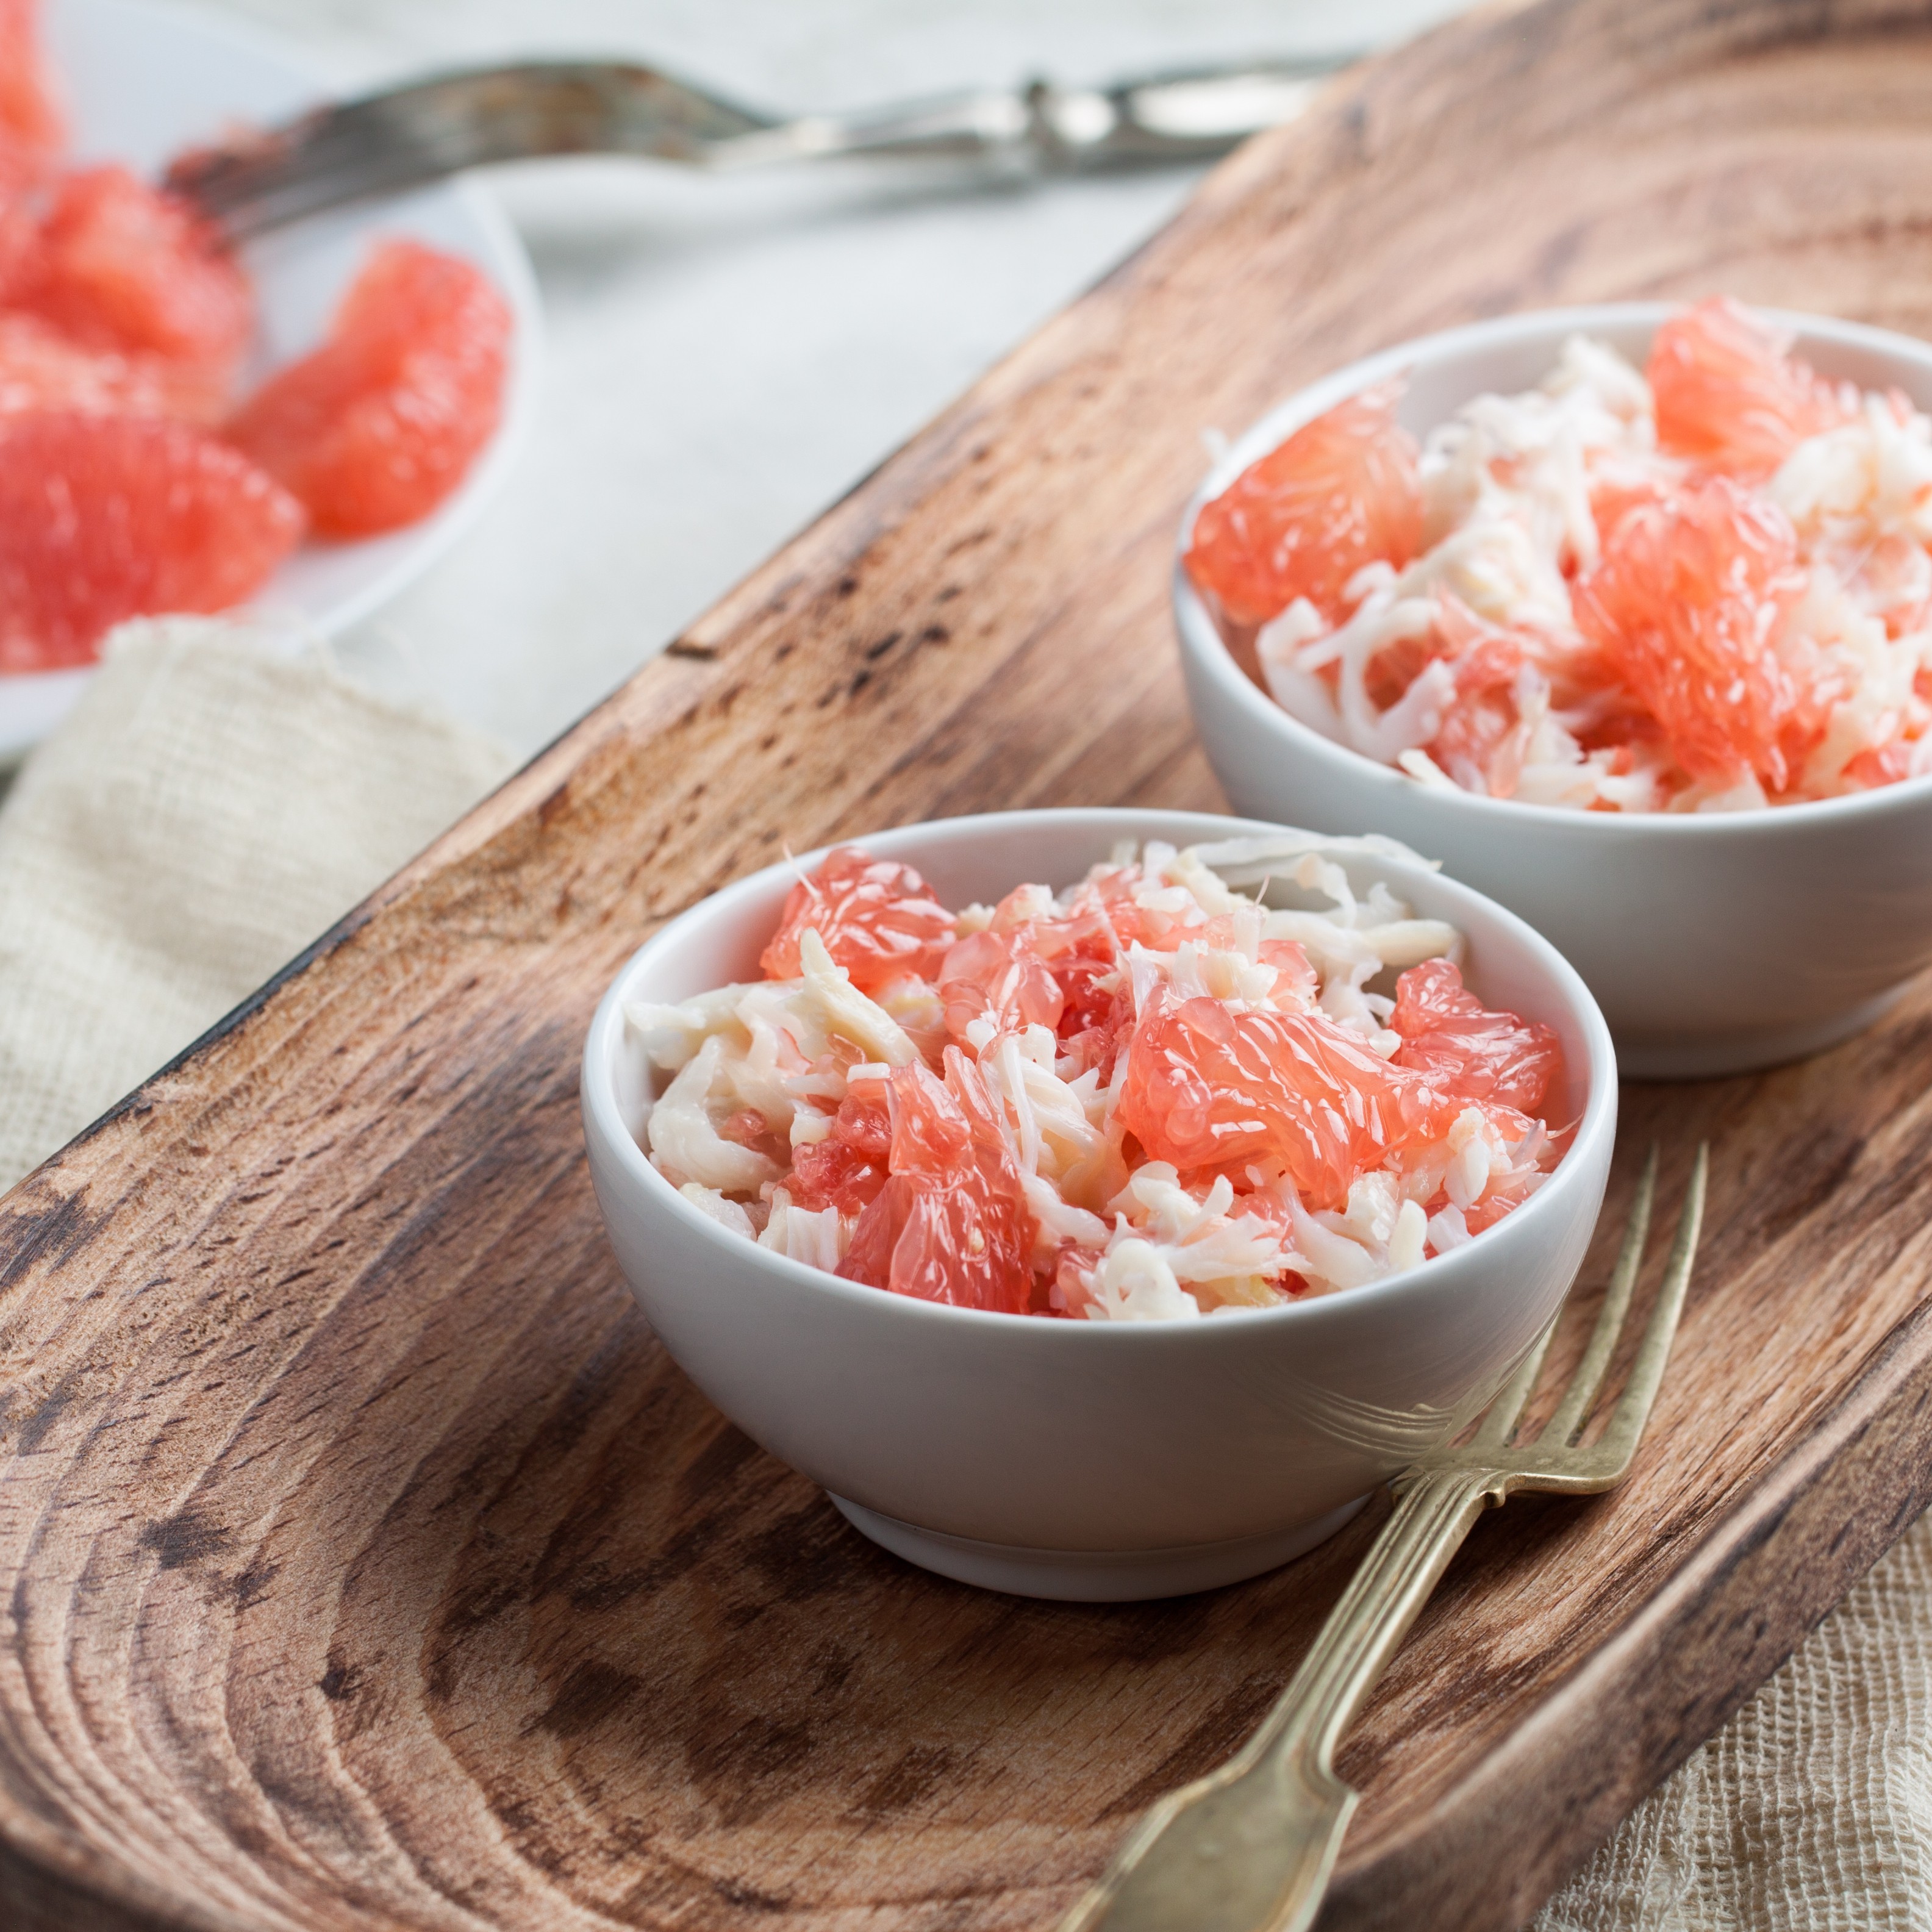 Grapefruit and shredded crab on a cutting board